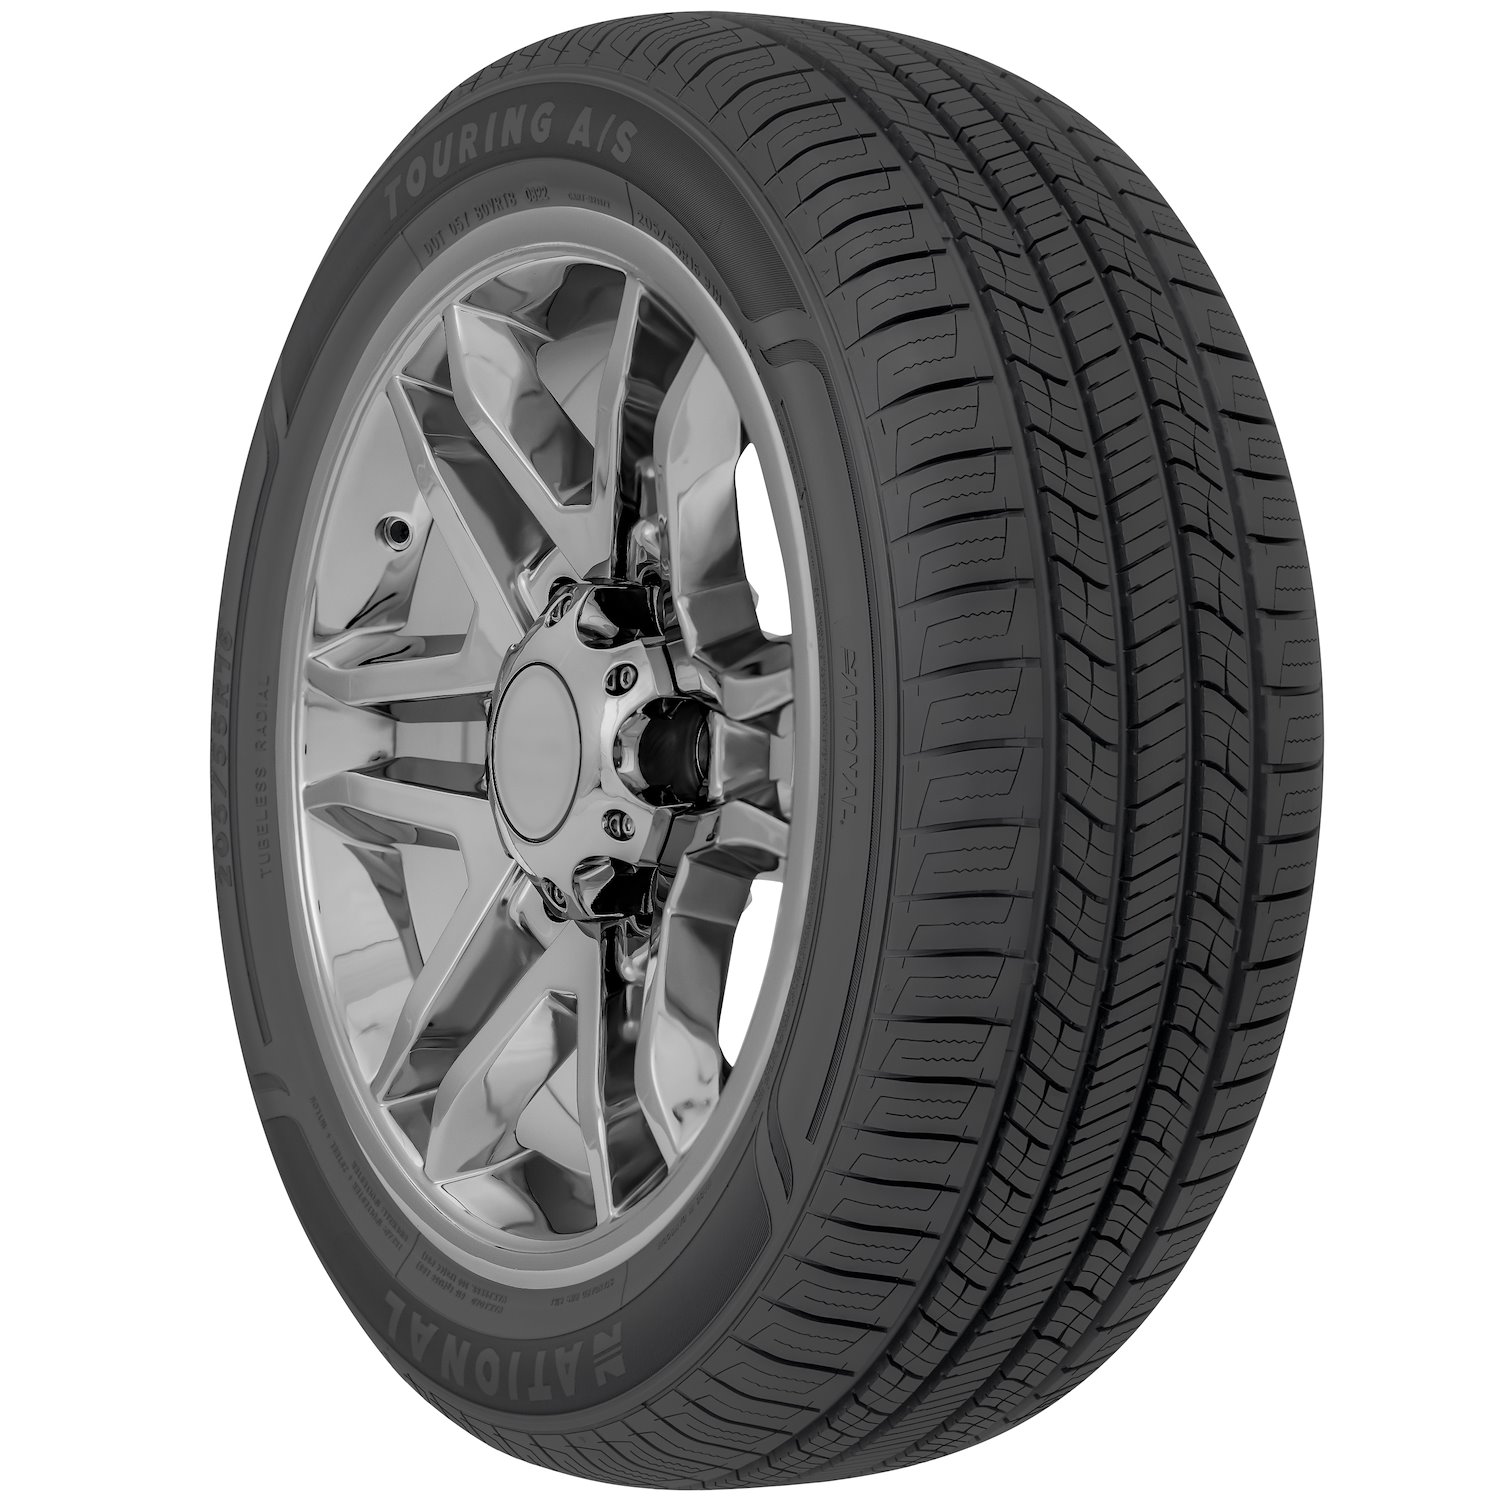 NLR48 Touring A/S Tire, 215/60R16